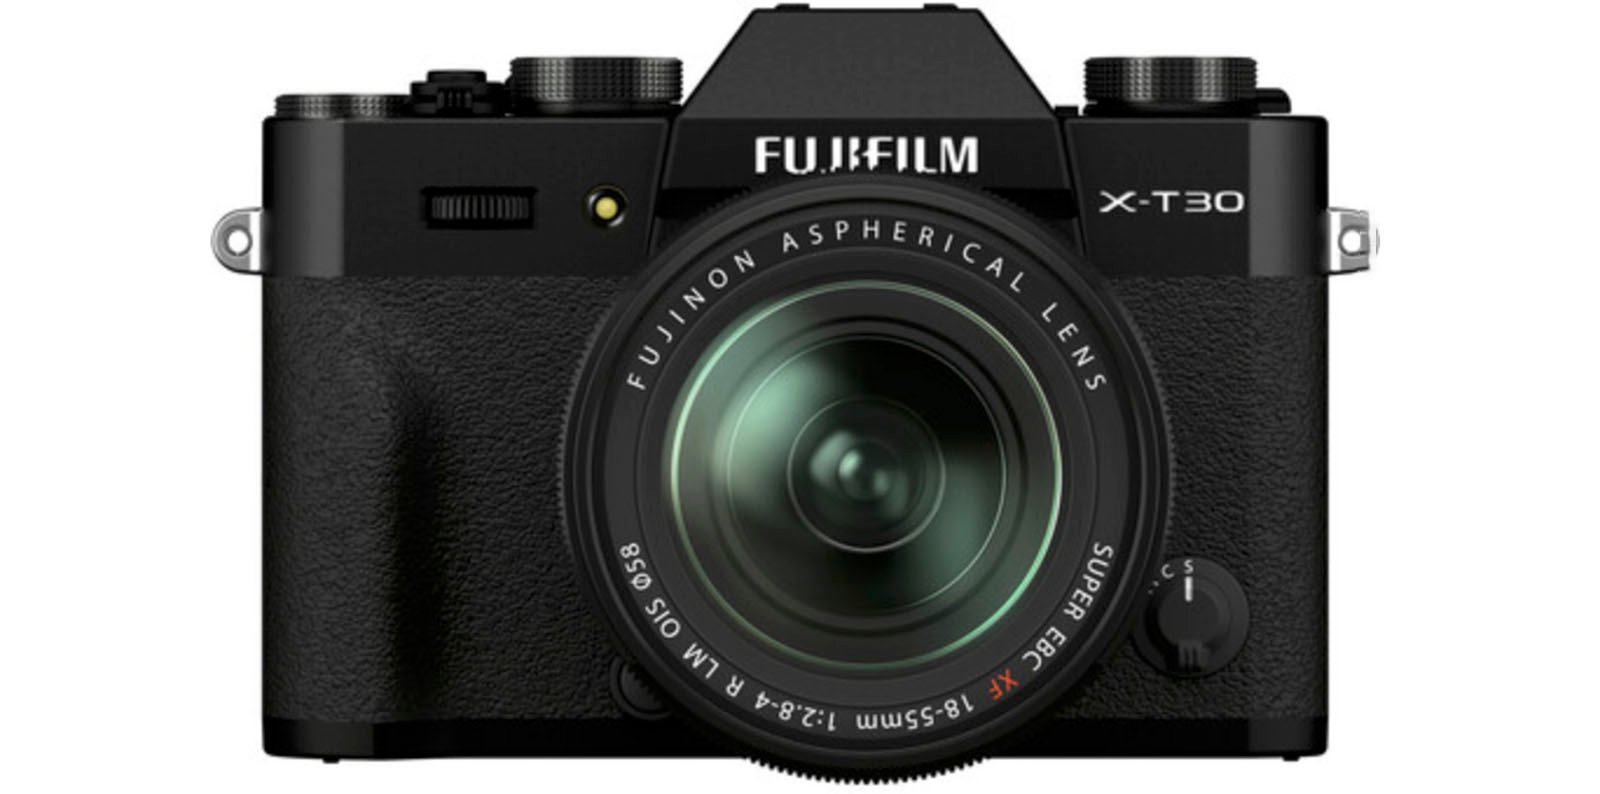 Front view of a Fujifilm X-T30 digital camera with a Fujinon Aspherical Lens. The body is primarily black, featuring various buttons and dials. The lens has text indicating its specifications: 18-55mm, 1:2.8-4 R LM OIS.